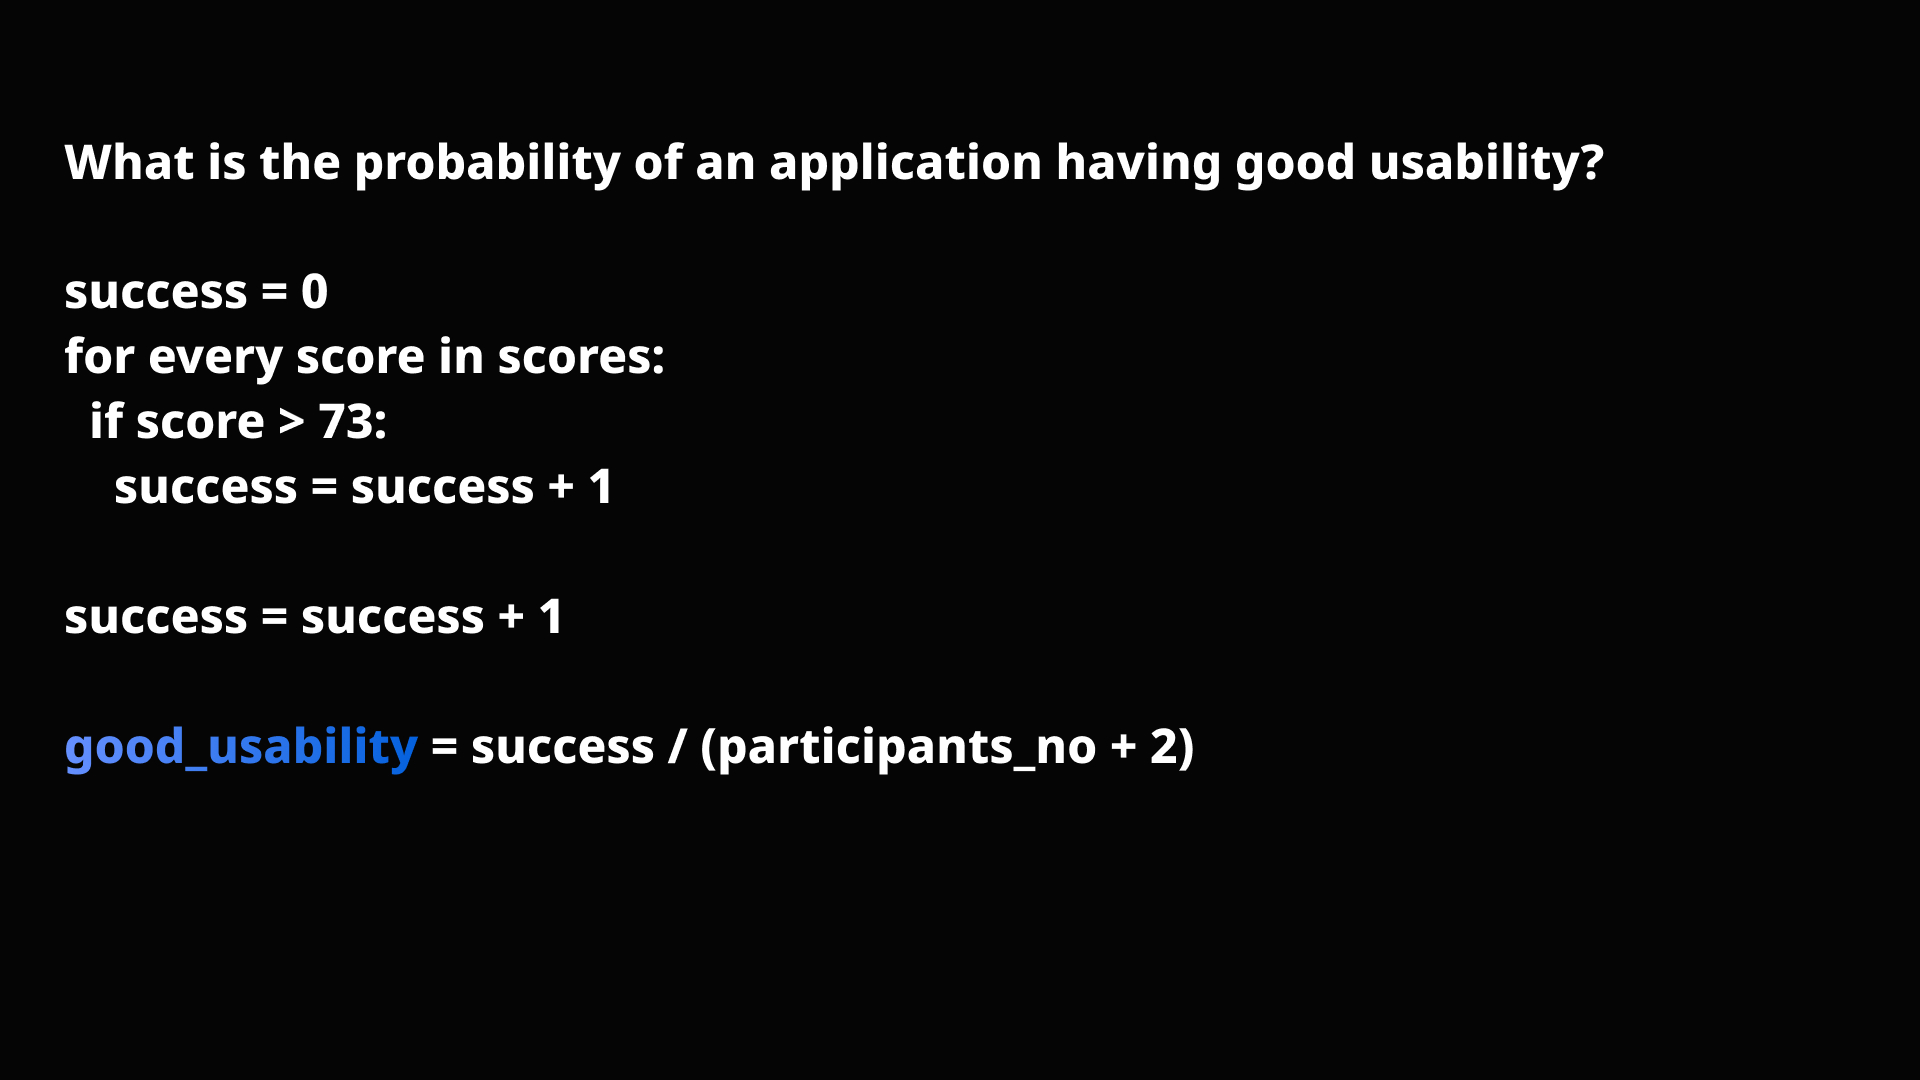 success = 0 for every score in scores: if score > 73: success = success + 1 success = success + 1 good_usability = success / (participants_no + 2)